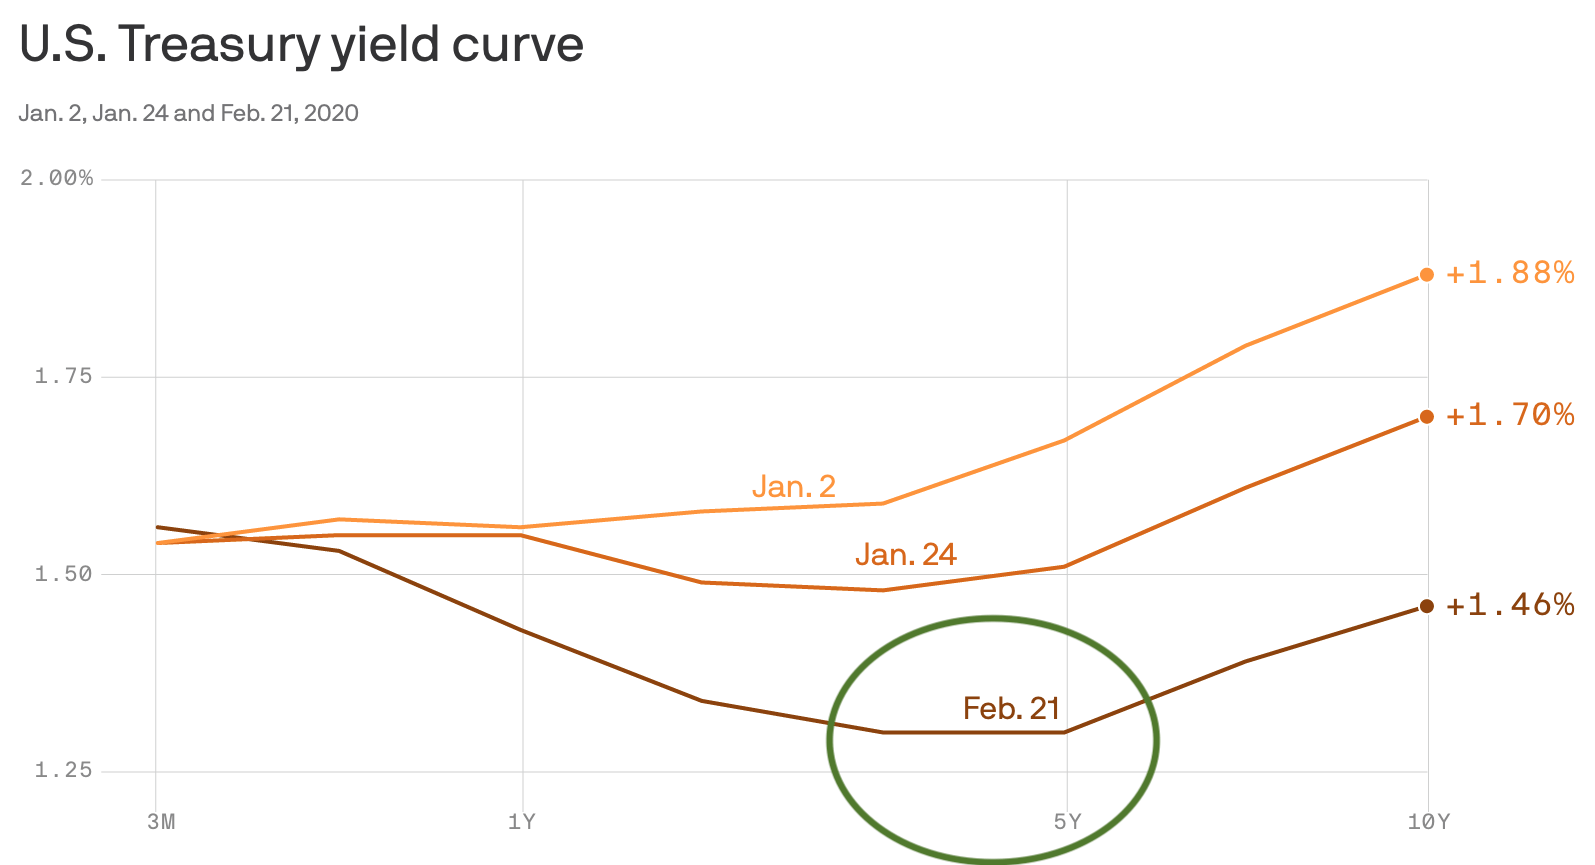 The inverted yield curve February, 2020